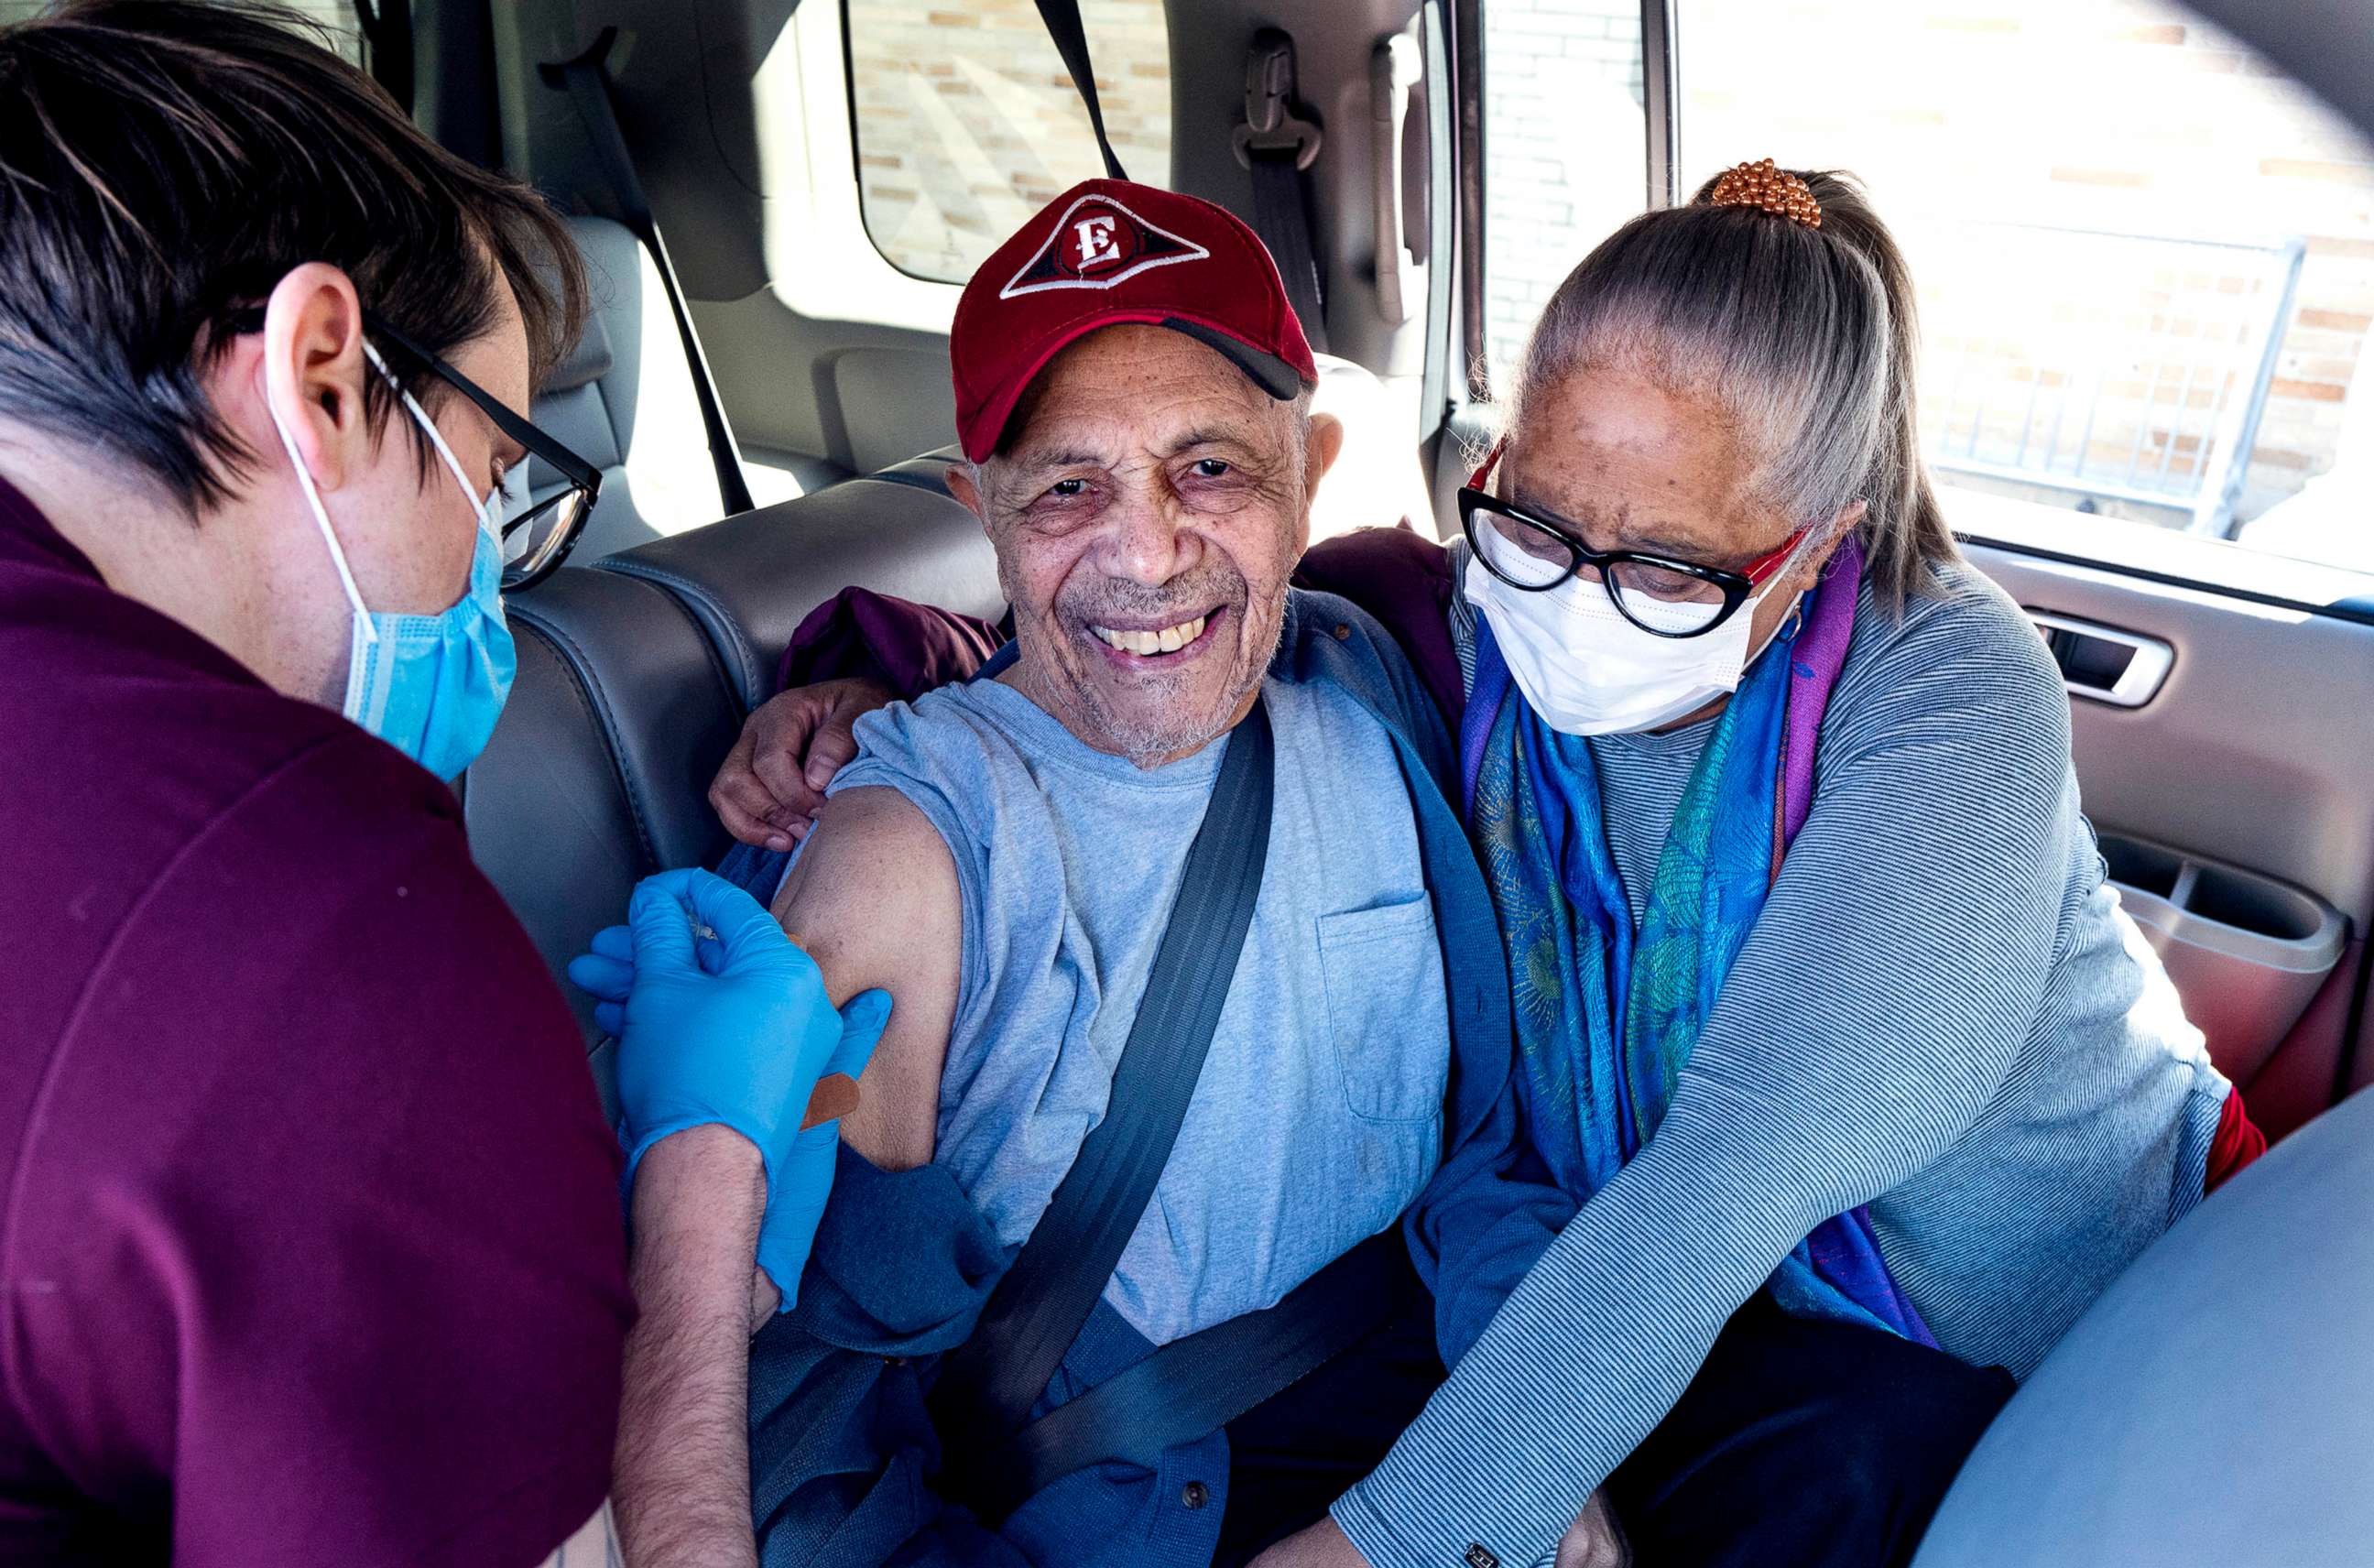 PHOTO: Andres Garcia, 90, guided by his daughter Irma Garcia, is vaccinated in the back seat of their car in Binghamton, N.Y., March 19, 2021.